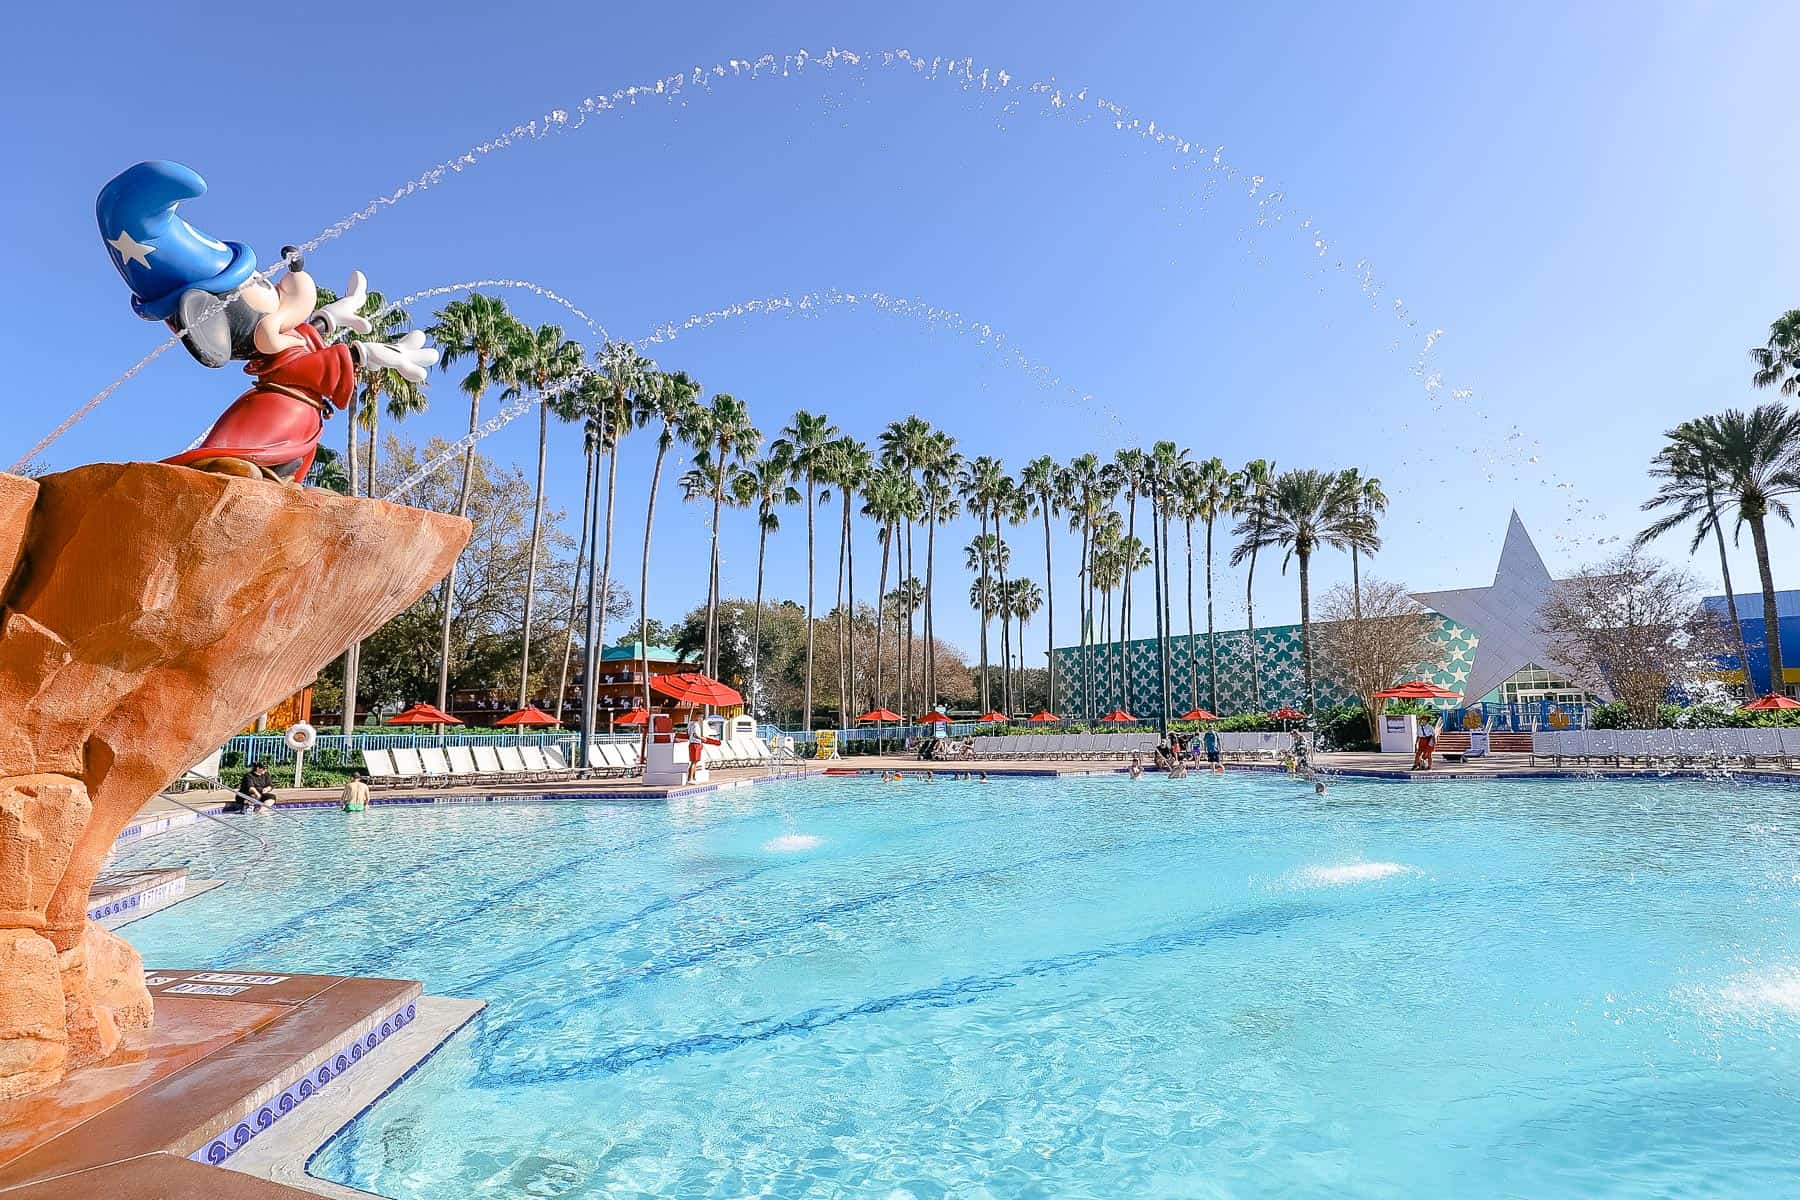 Sorcerer Mickey spraying water into the pool. 